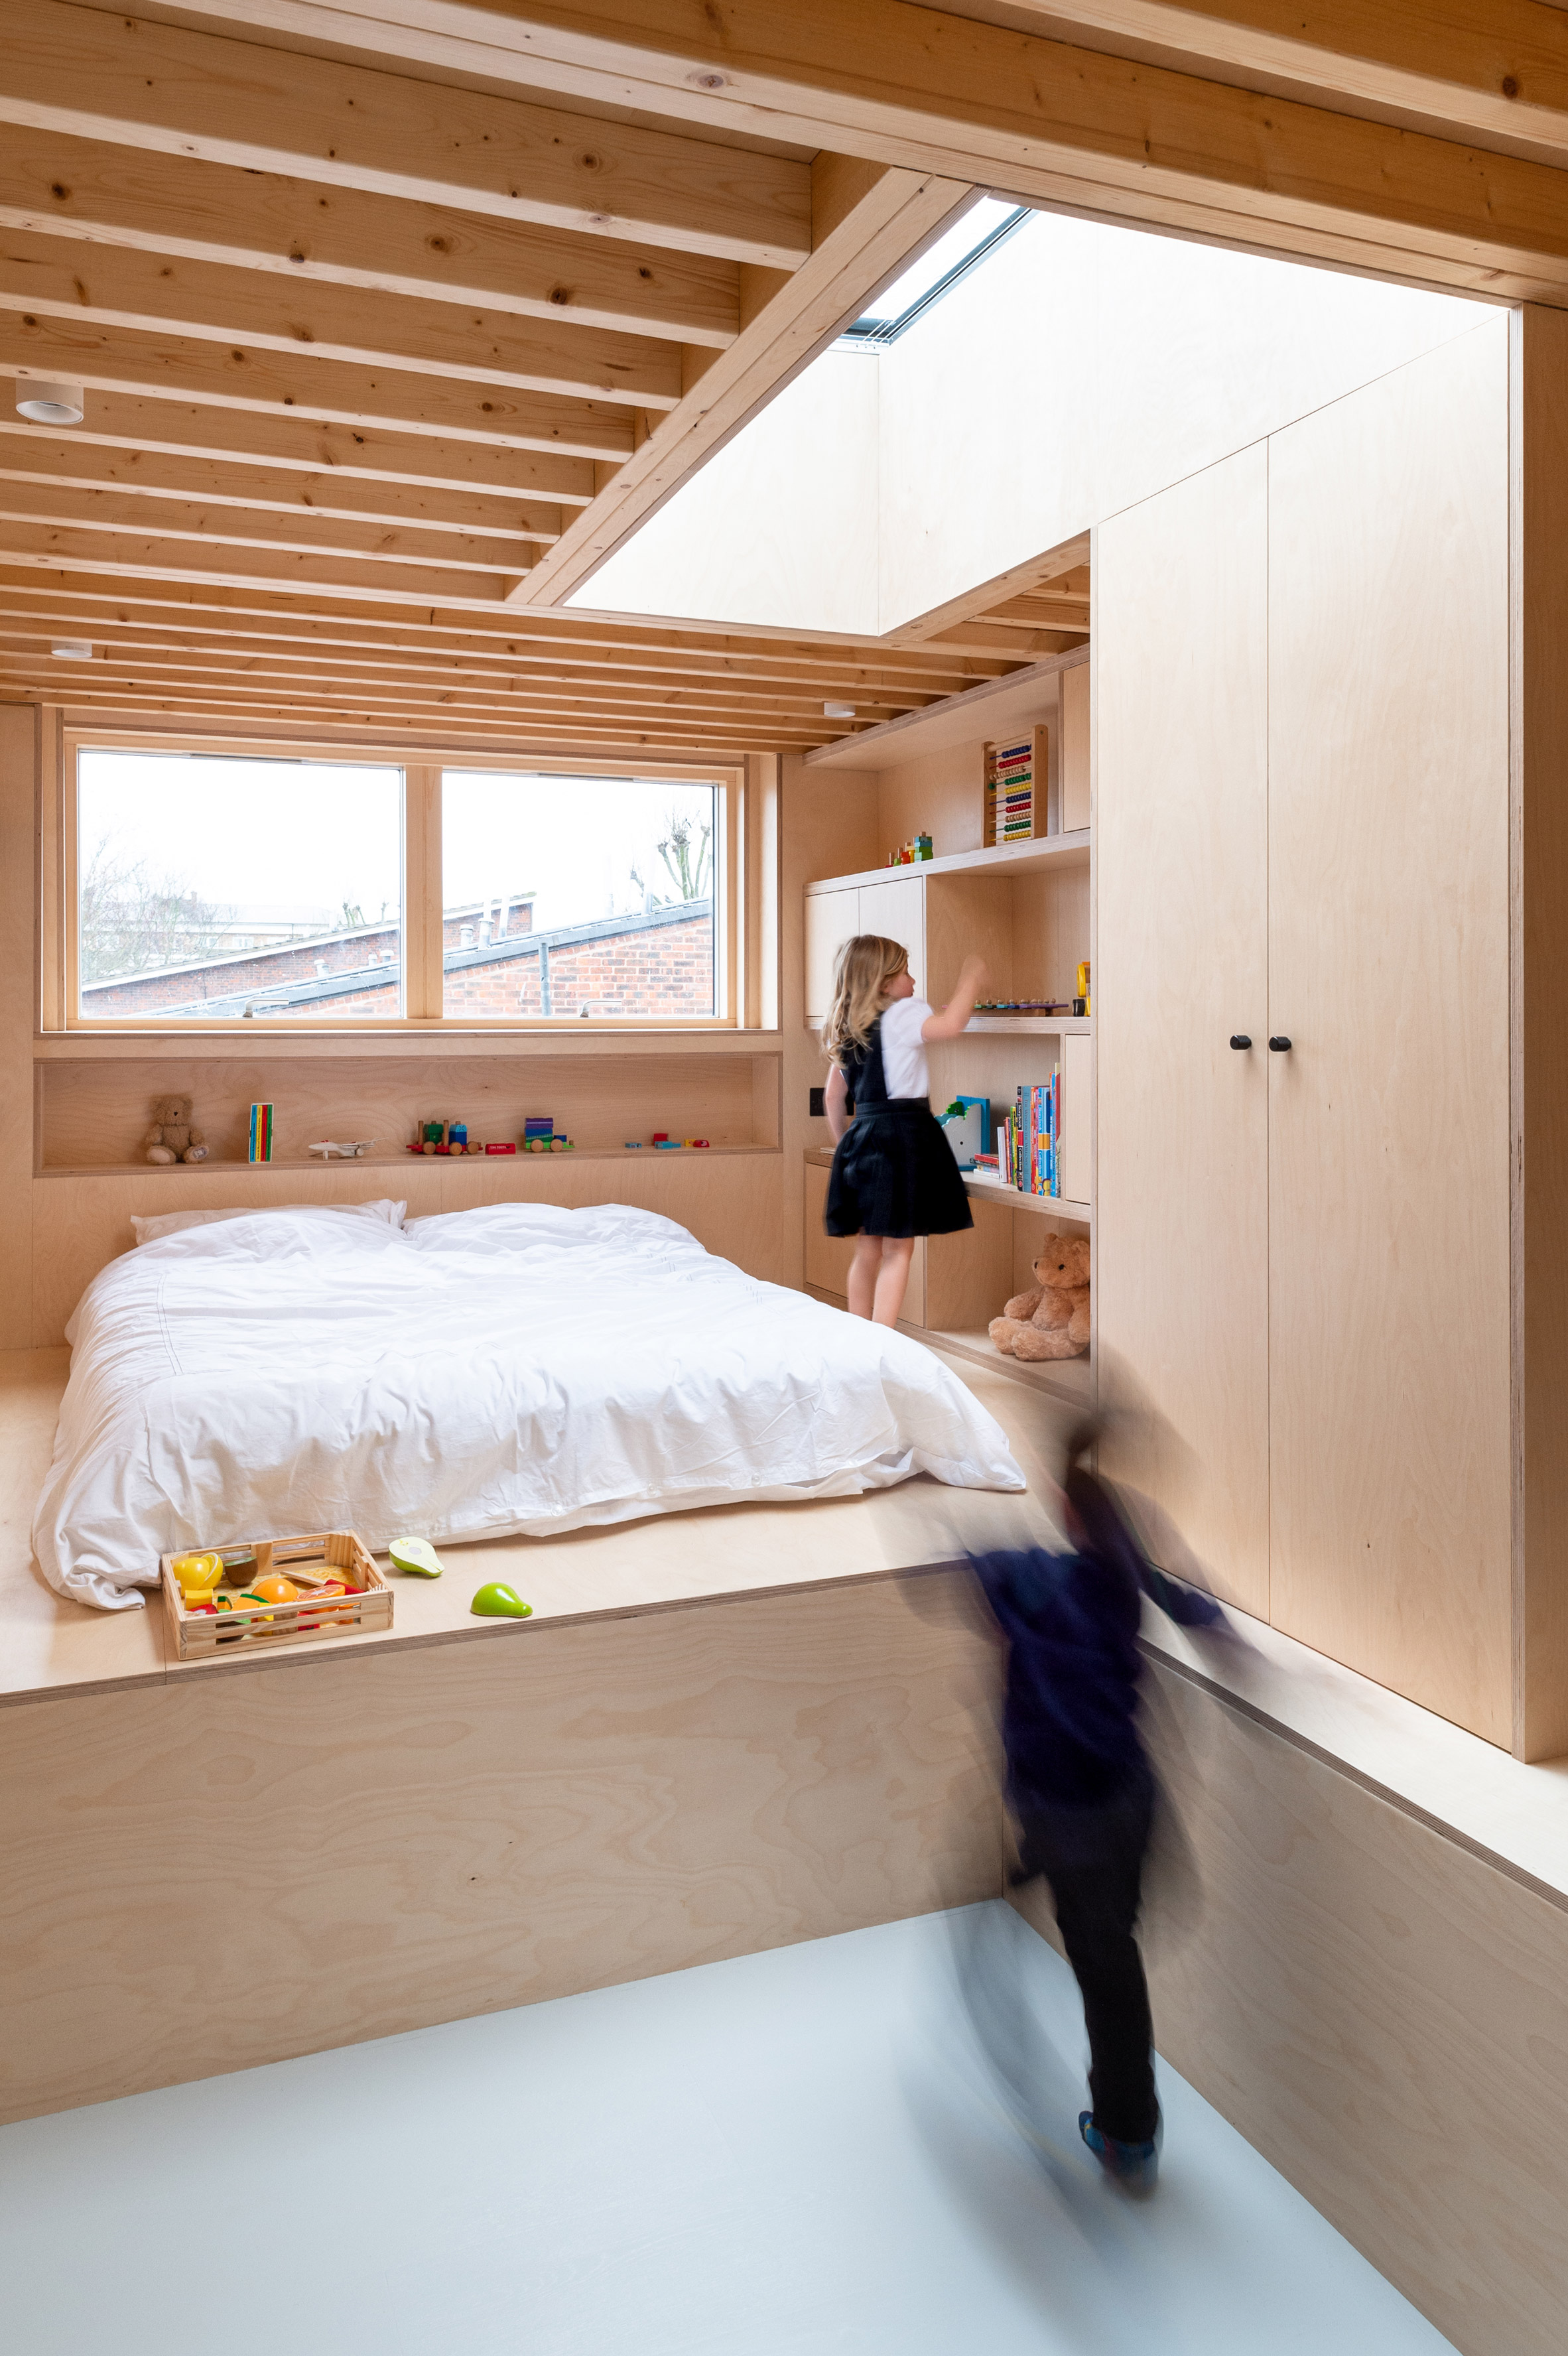 A timber-lined bedroom